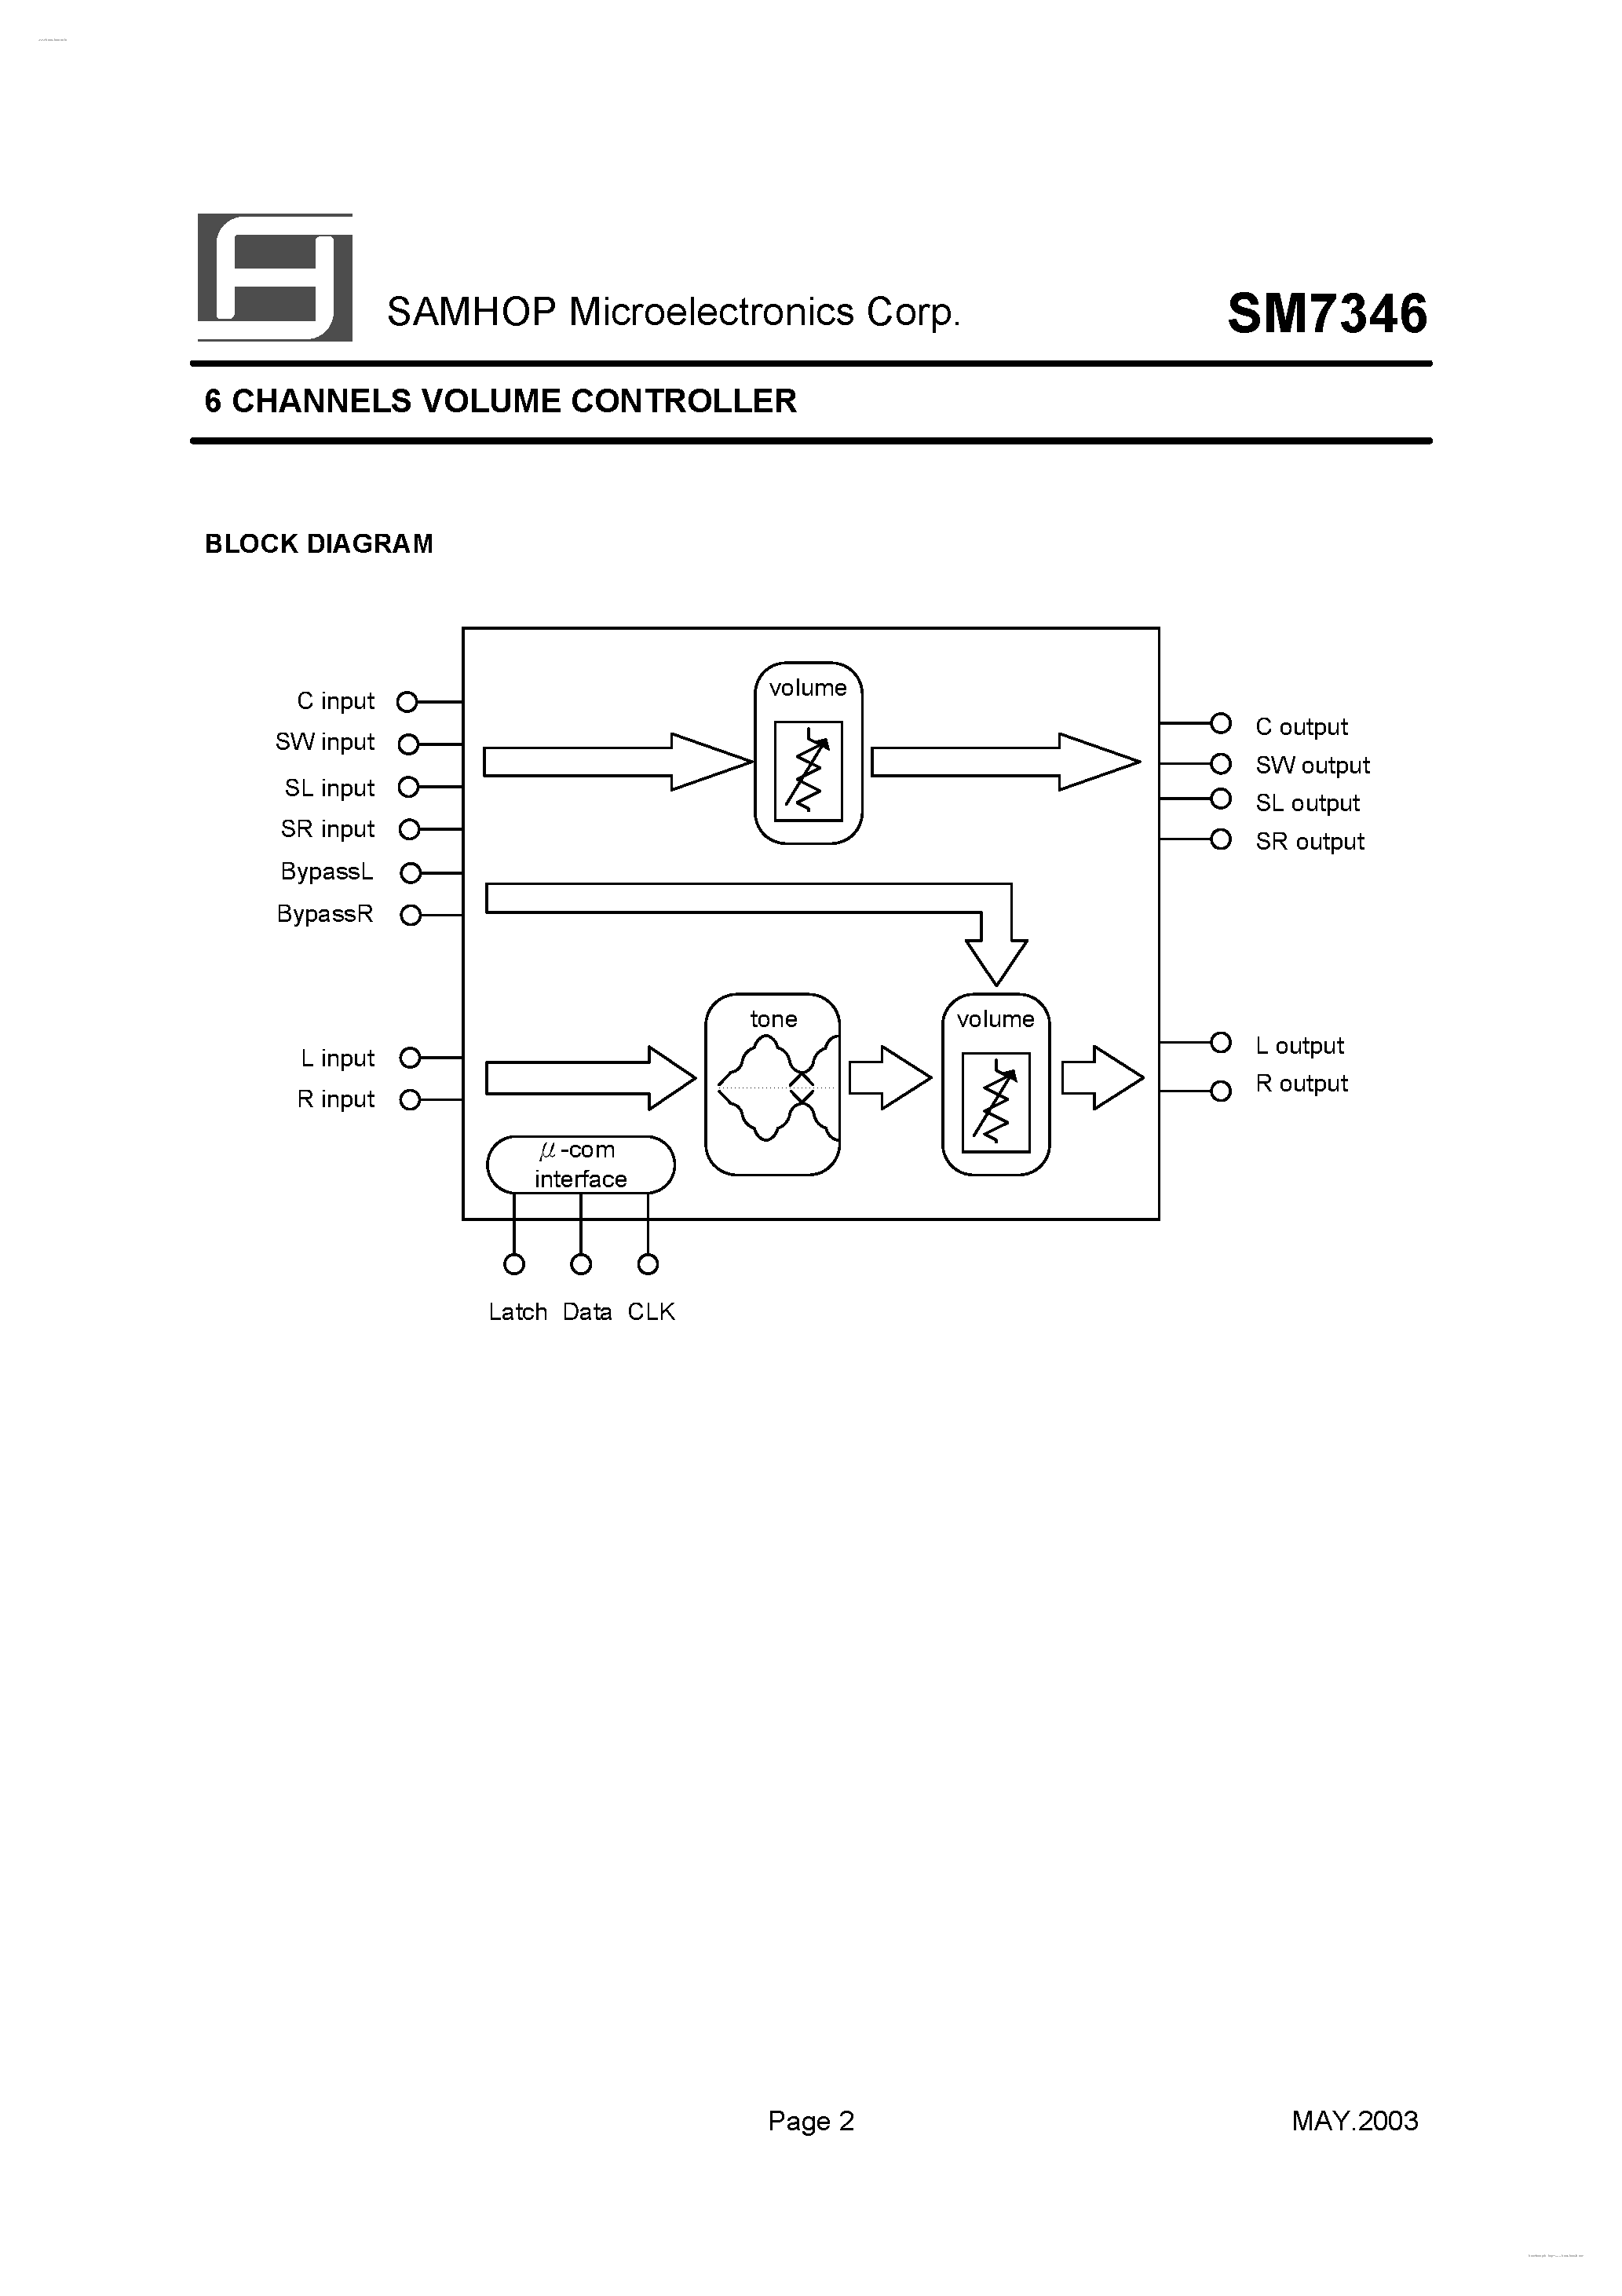 Datasheet SM7346 - 6 CHANNELS VOLUME CONTROLLER page 2